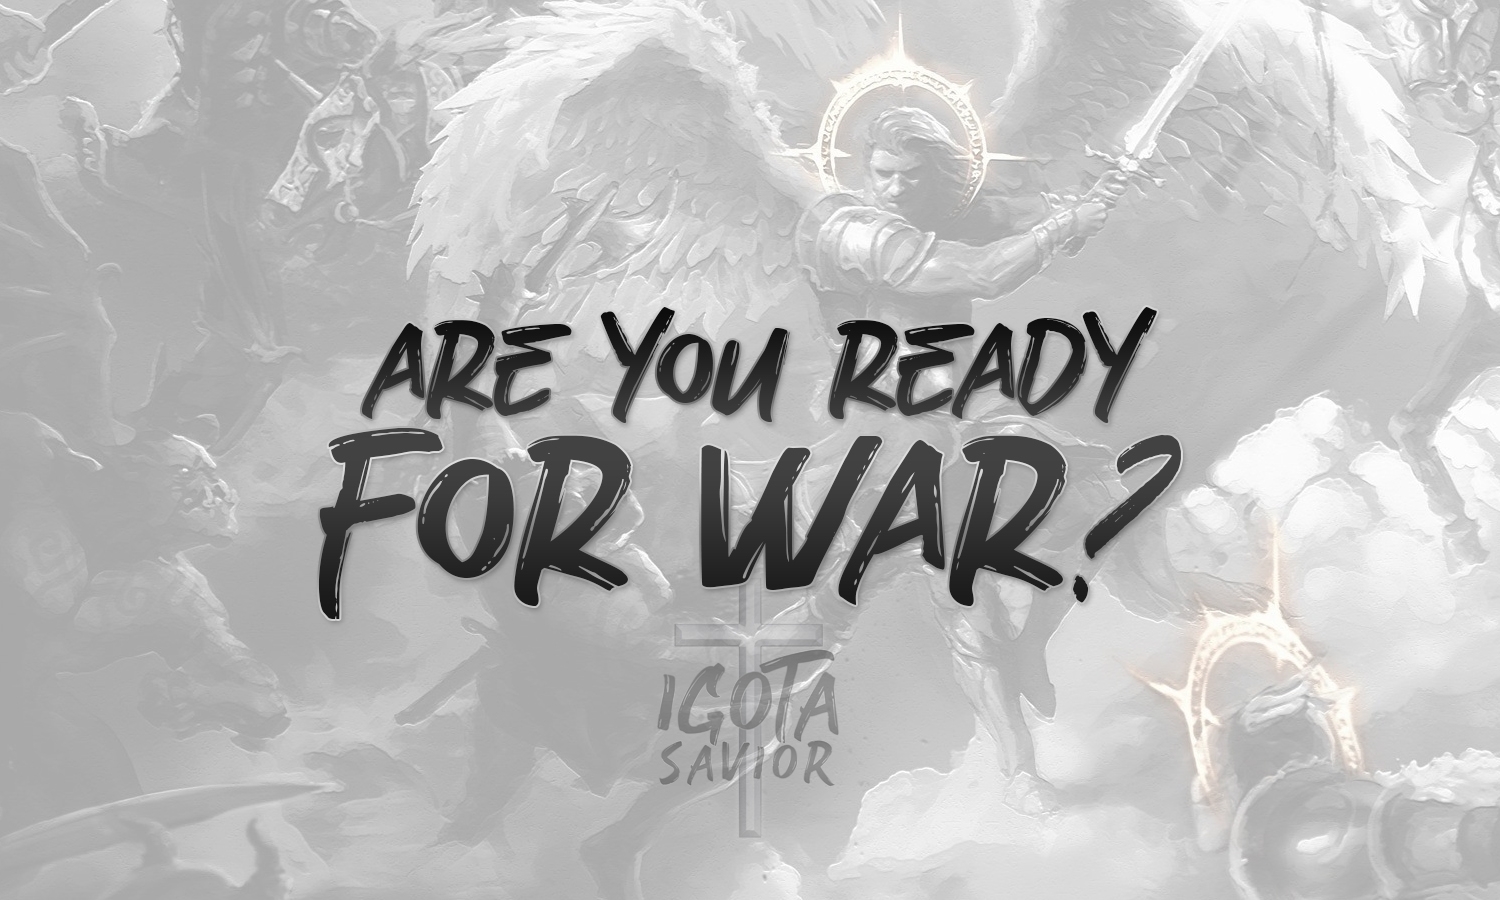 Are You Ready For War?